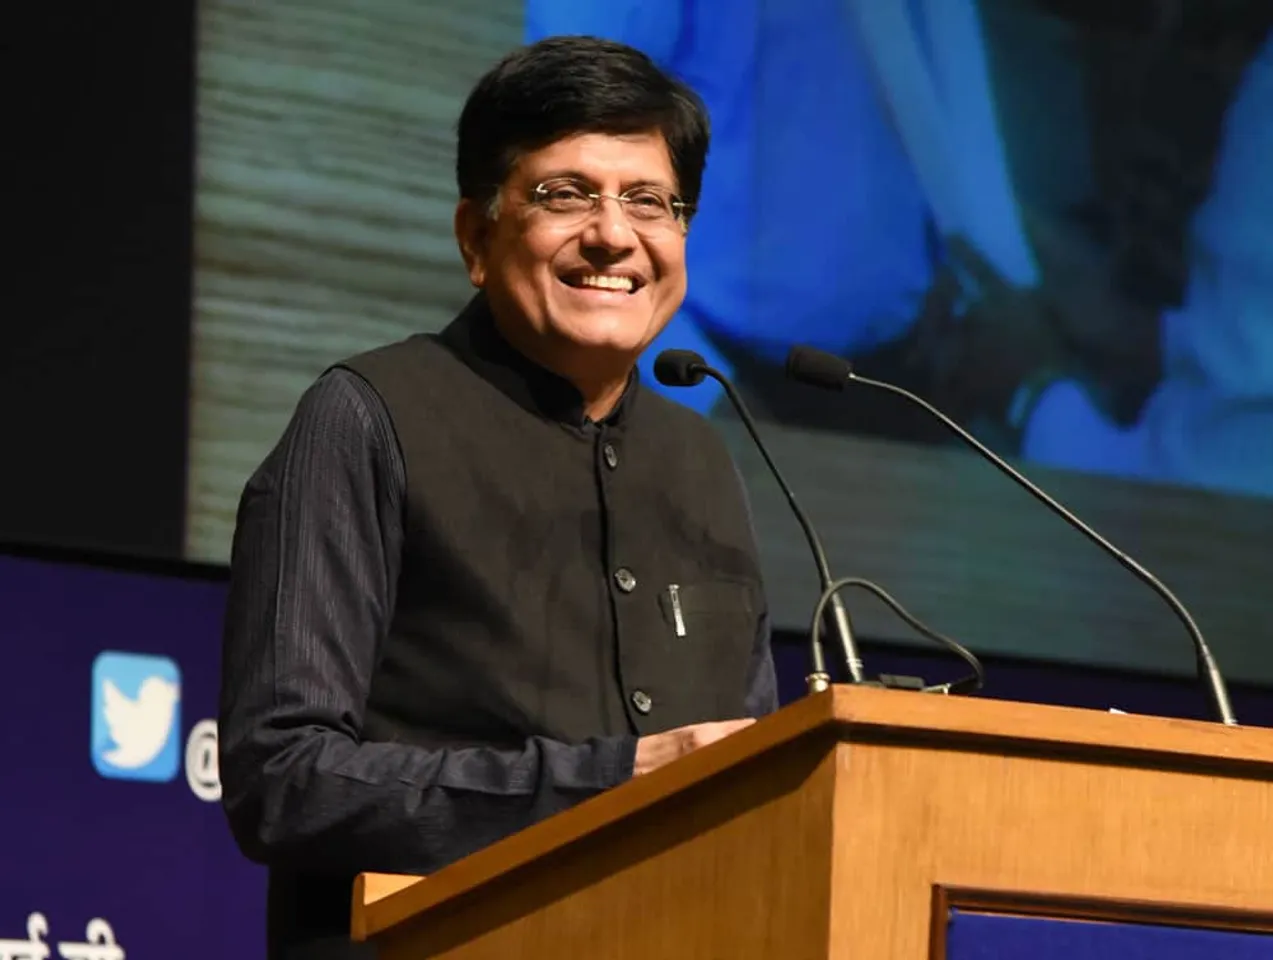 India-UAE On a Fast Track to Clinch a Trade Deal - Piyush Goyal